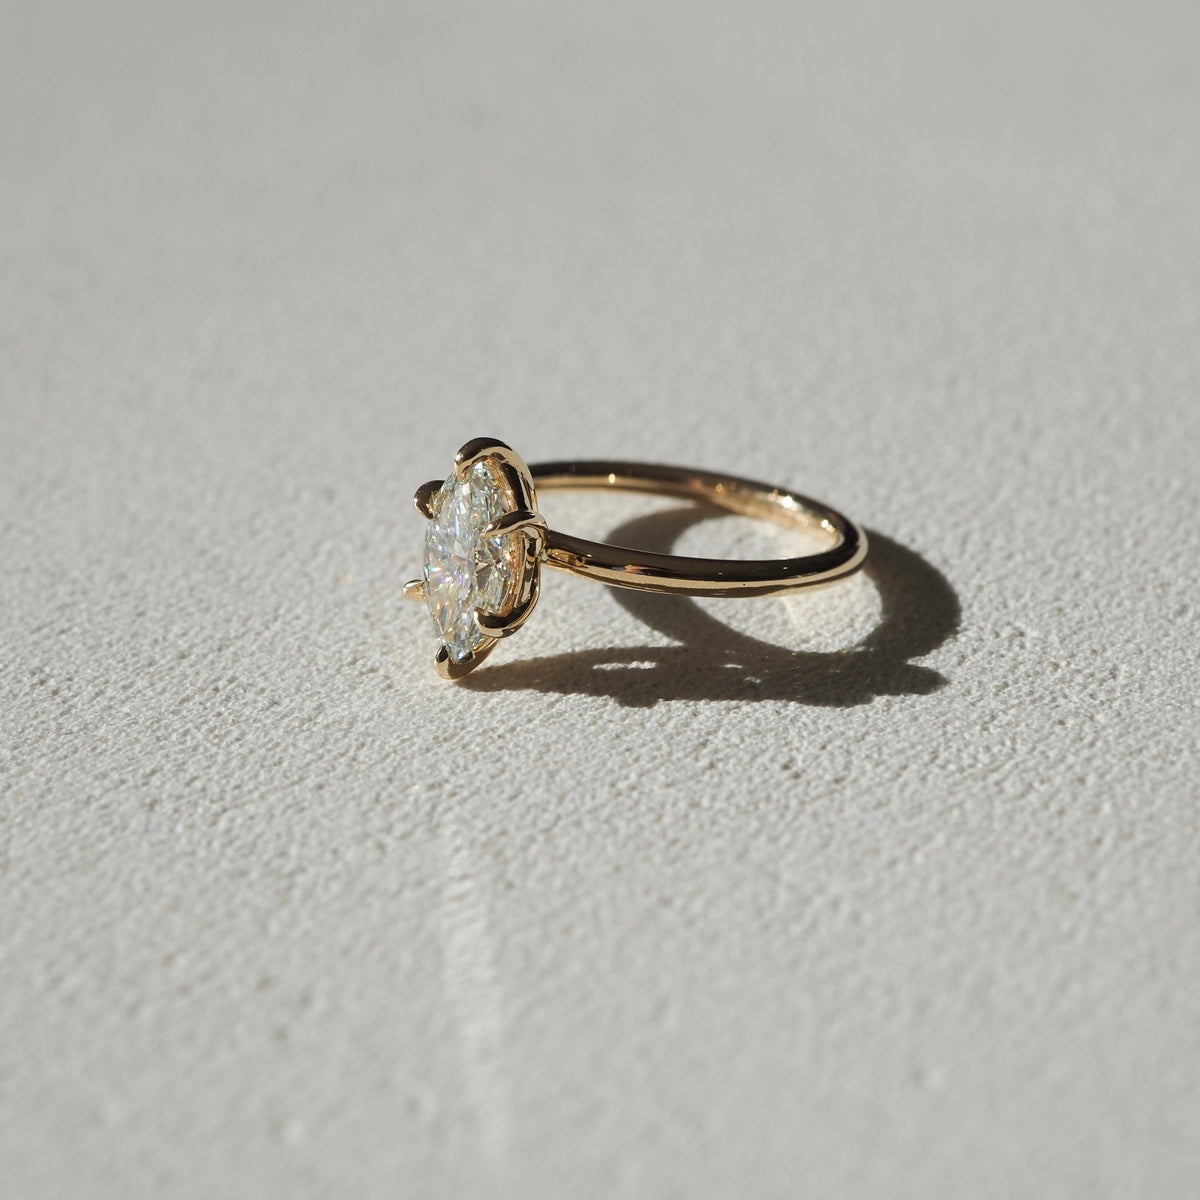 A mesmerising six claw solitaire engagement ring — showcasing the slender silhouette of a marquise cut lab-grown diamond - set in solid 18ct yellow gold. 